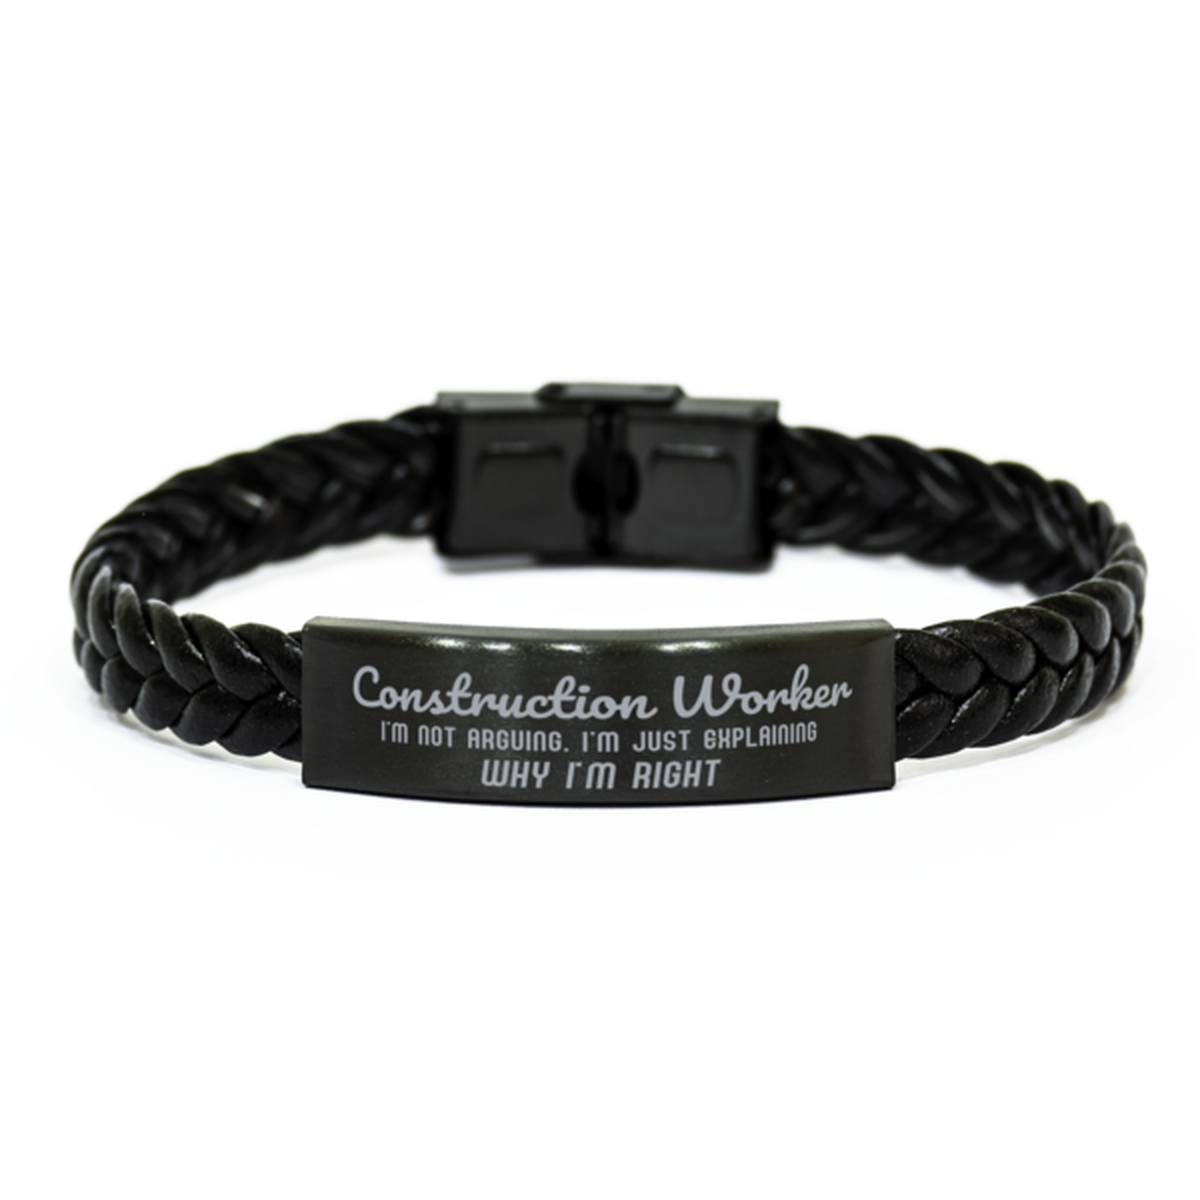 Construction Worker I'm not Arguing. I'm Just Explaining Why I'm RIGHT Braided Leather Bracelet, Graduation Birthday Christmas Construction Worker Gifts For Construction Worker Funny Saying Quote Present for Men Women Coworker